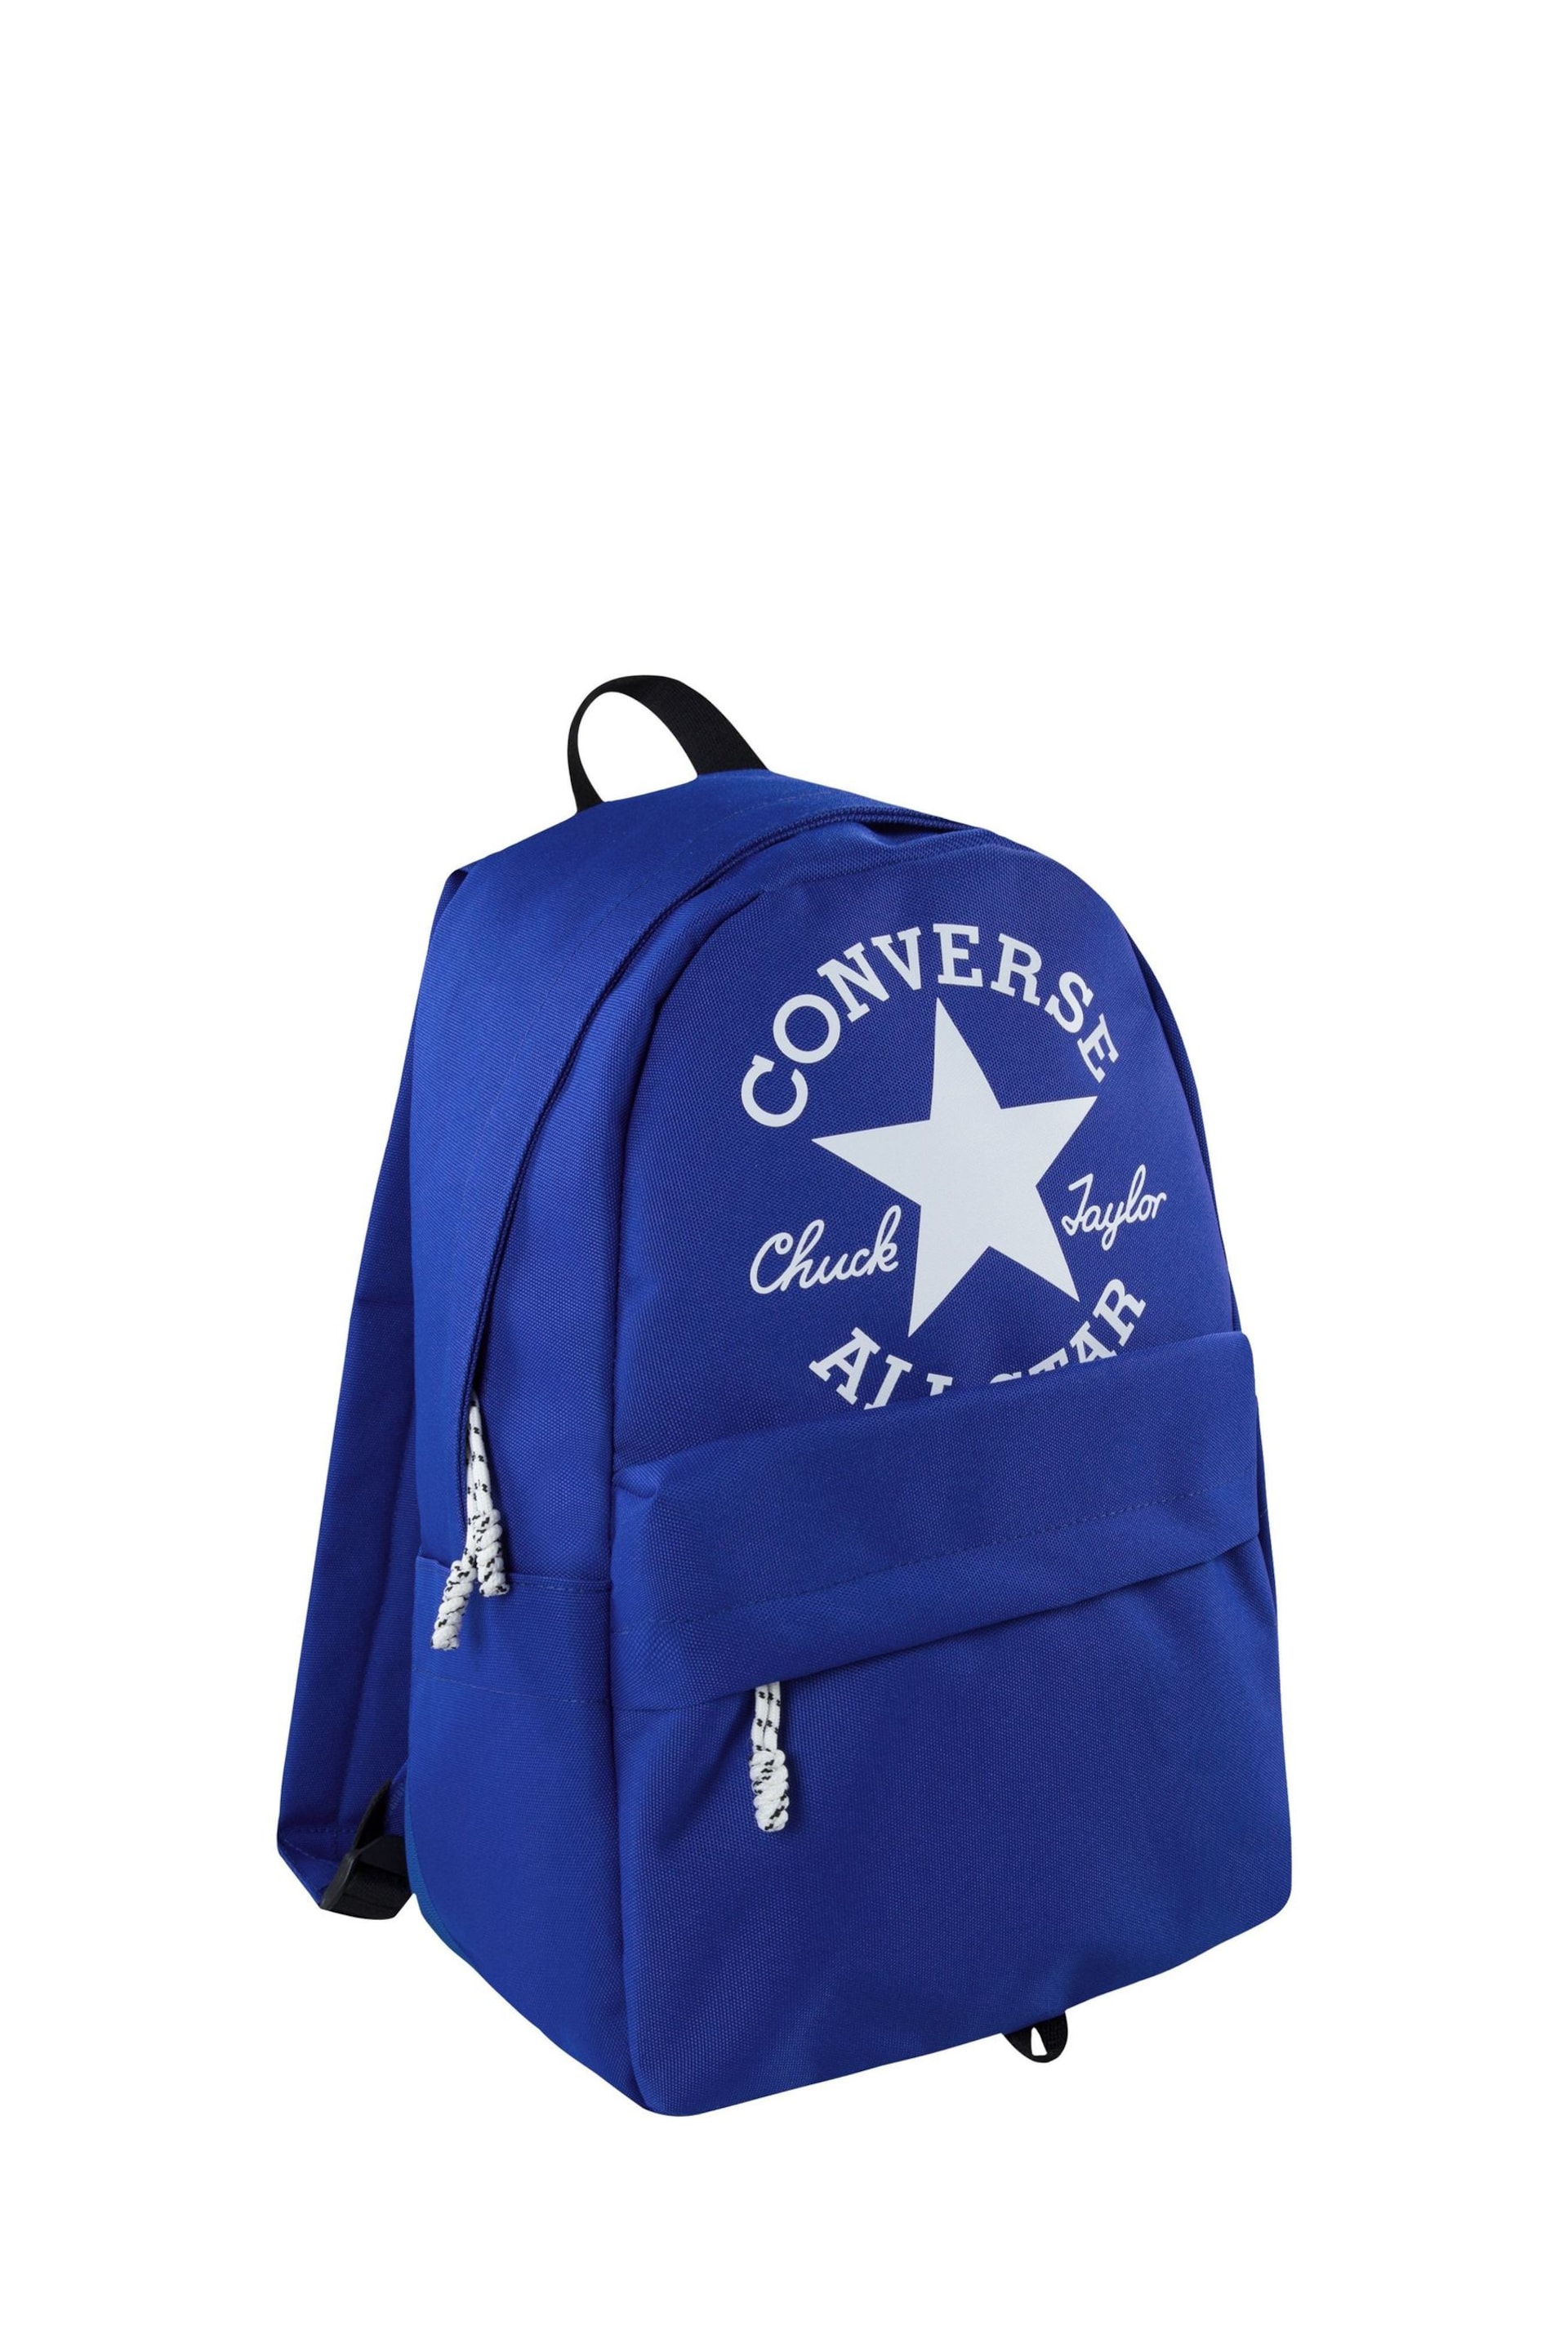 Converse Blue Kids Backpack - Image 3 of 10